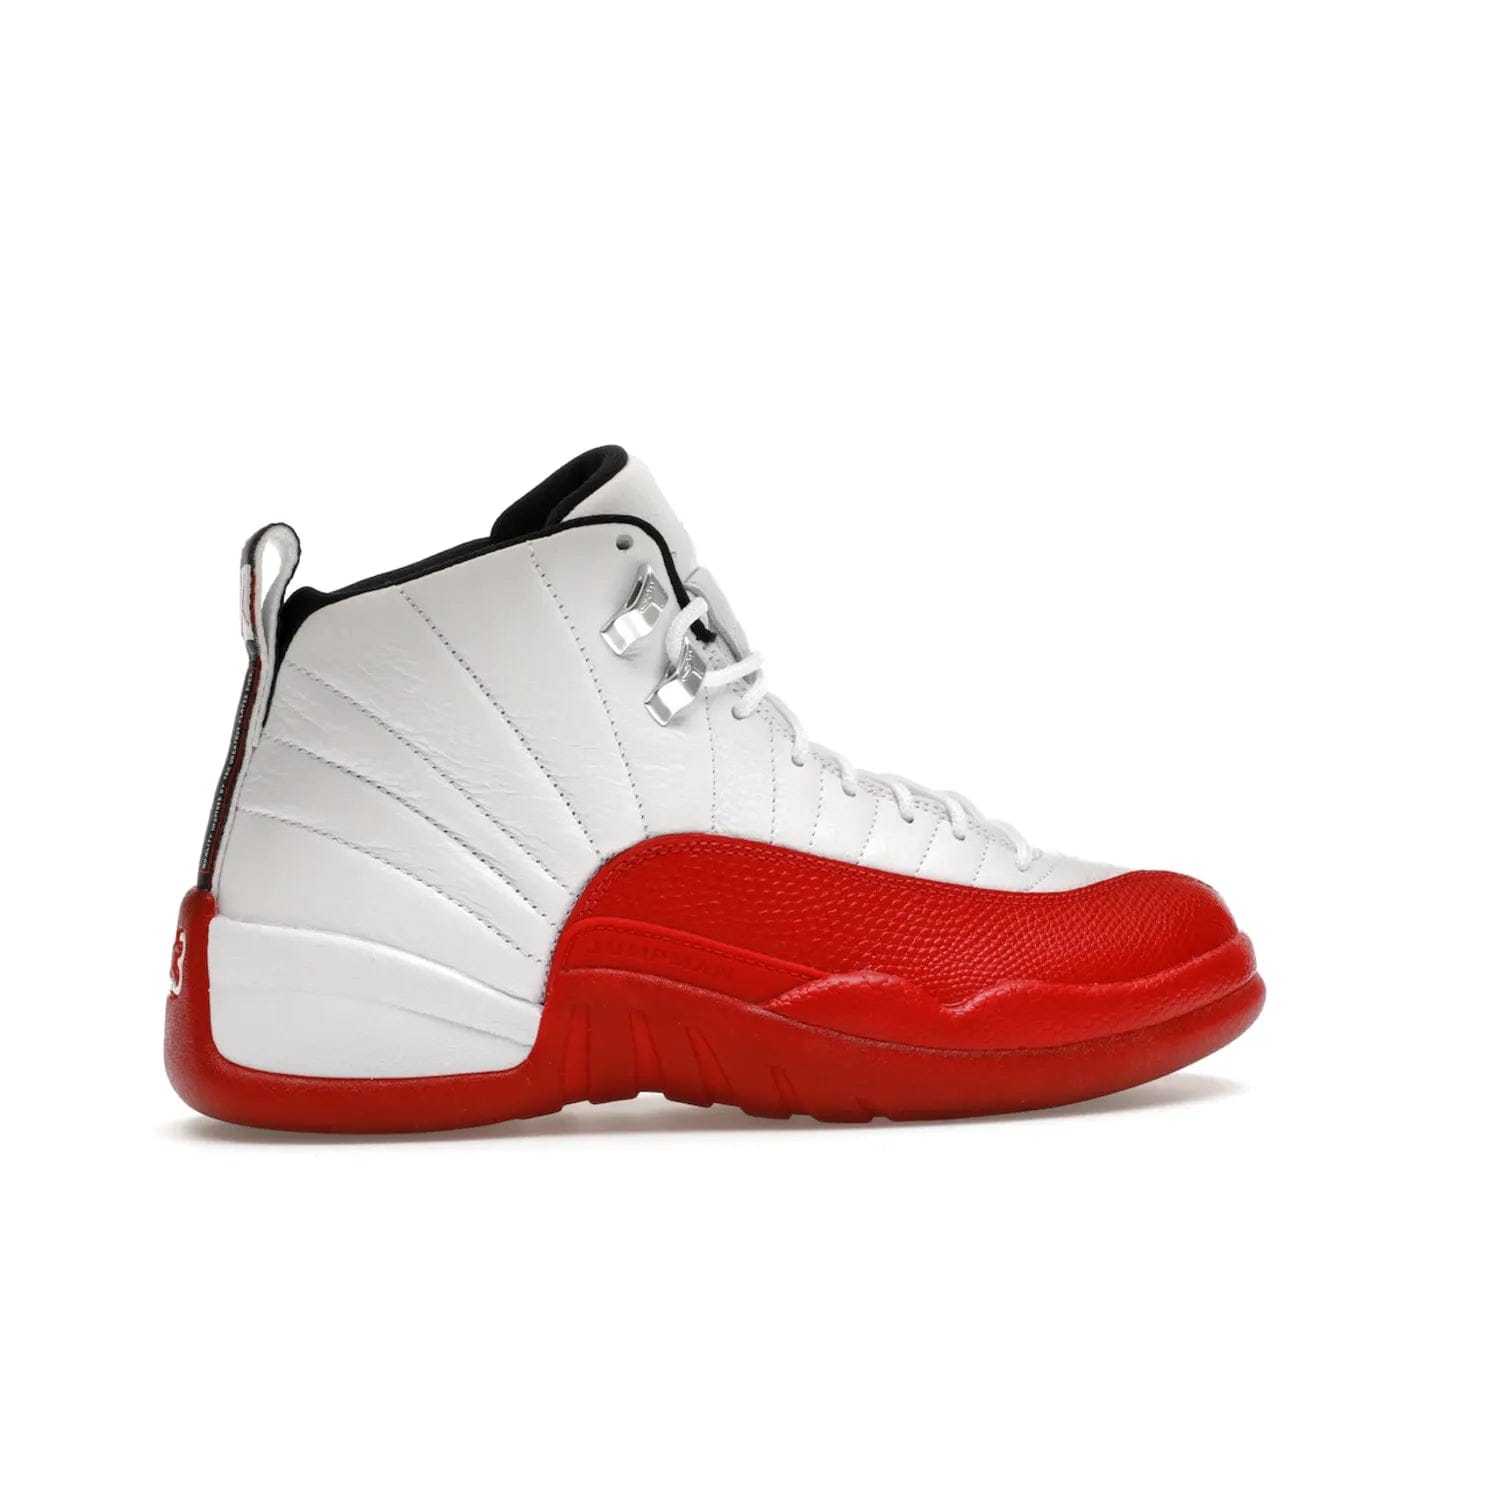 Jordan 12 Retro Cherry (2023) - Image 35 - Only at www.BallersClubKickz.com - Live your sneaker legend with the Jordan 12 Retro Cherry. Iconic pebbled leather mudguards, quilted uppers, and varsity red accents make this 1997 classic a must-have for 2023. Shine on with silver hardware and matching midsoles, and bring it all together for limited-edition style on October 28th. Step into Jordan legacy with the Retro Cherry.